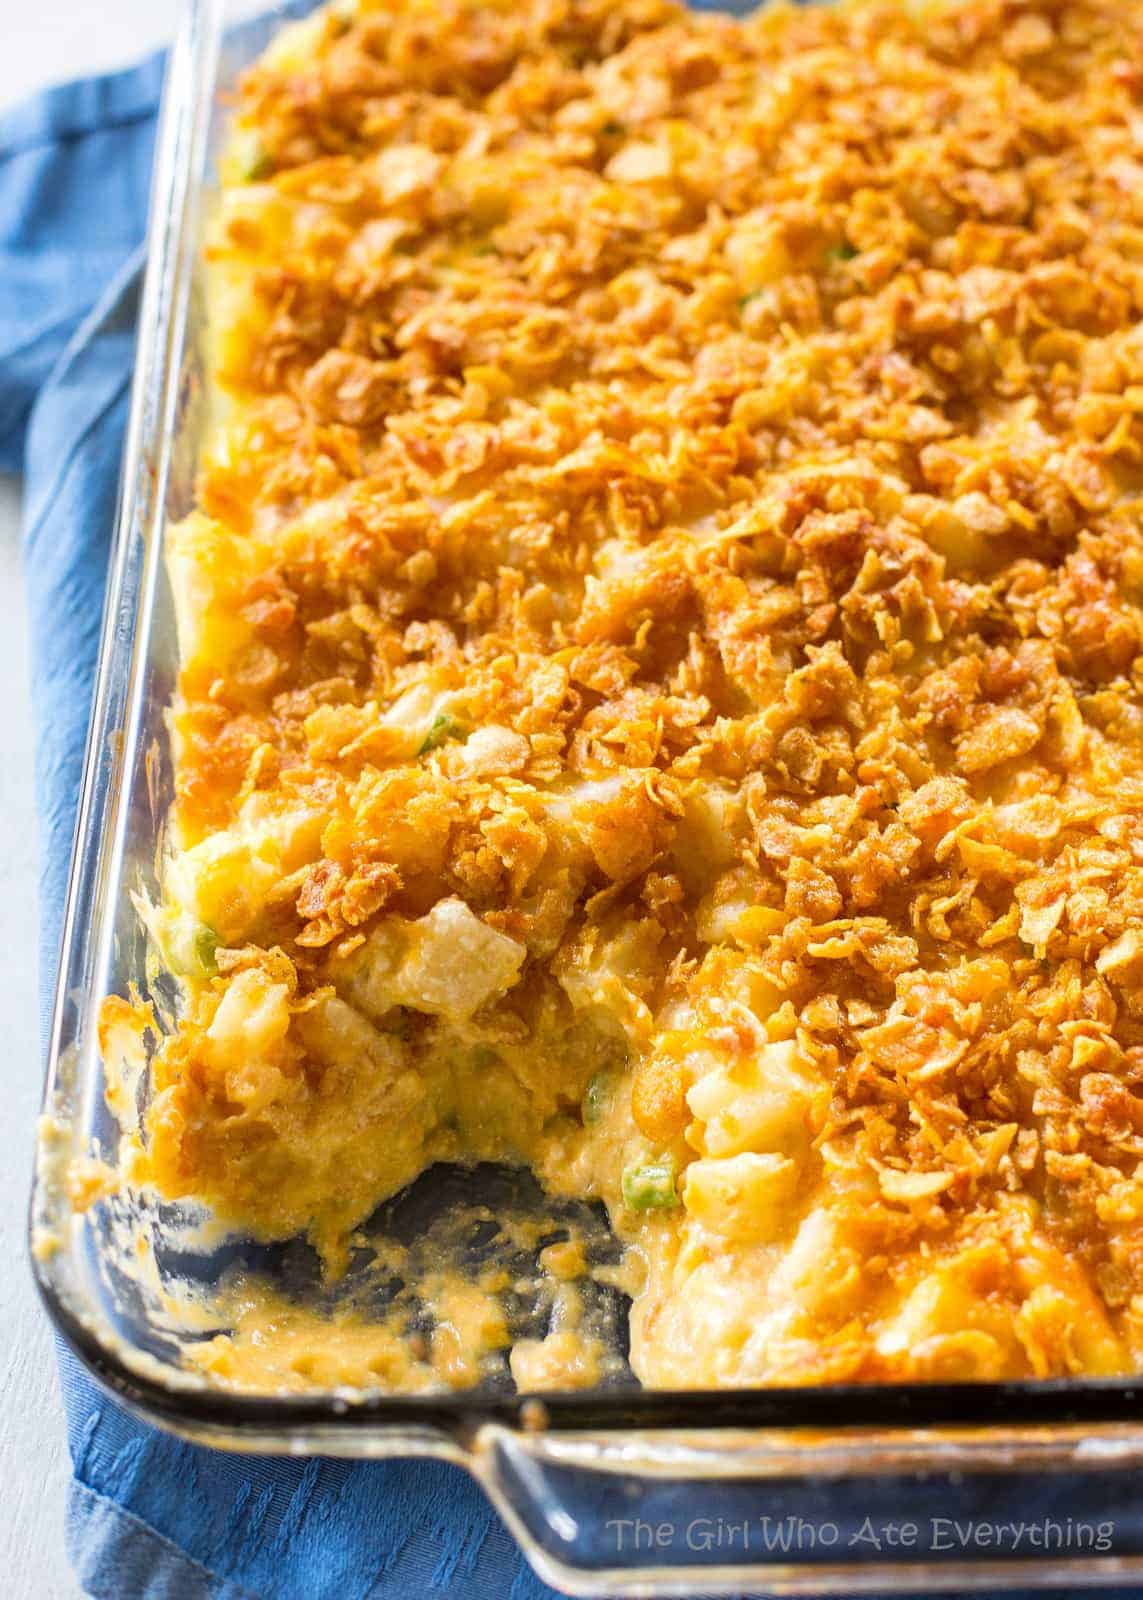 Funeral Potatoes Recipe - The Girl Who Ate Everything